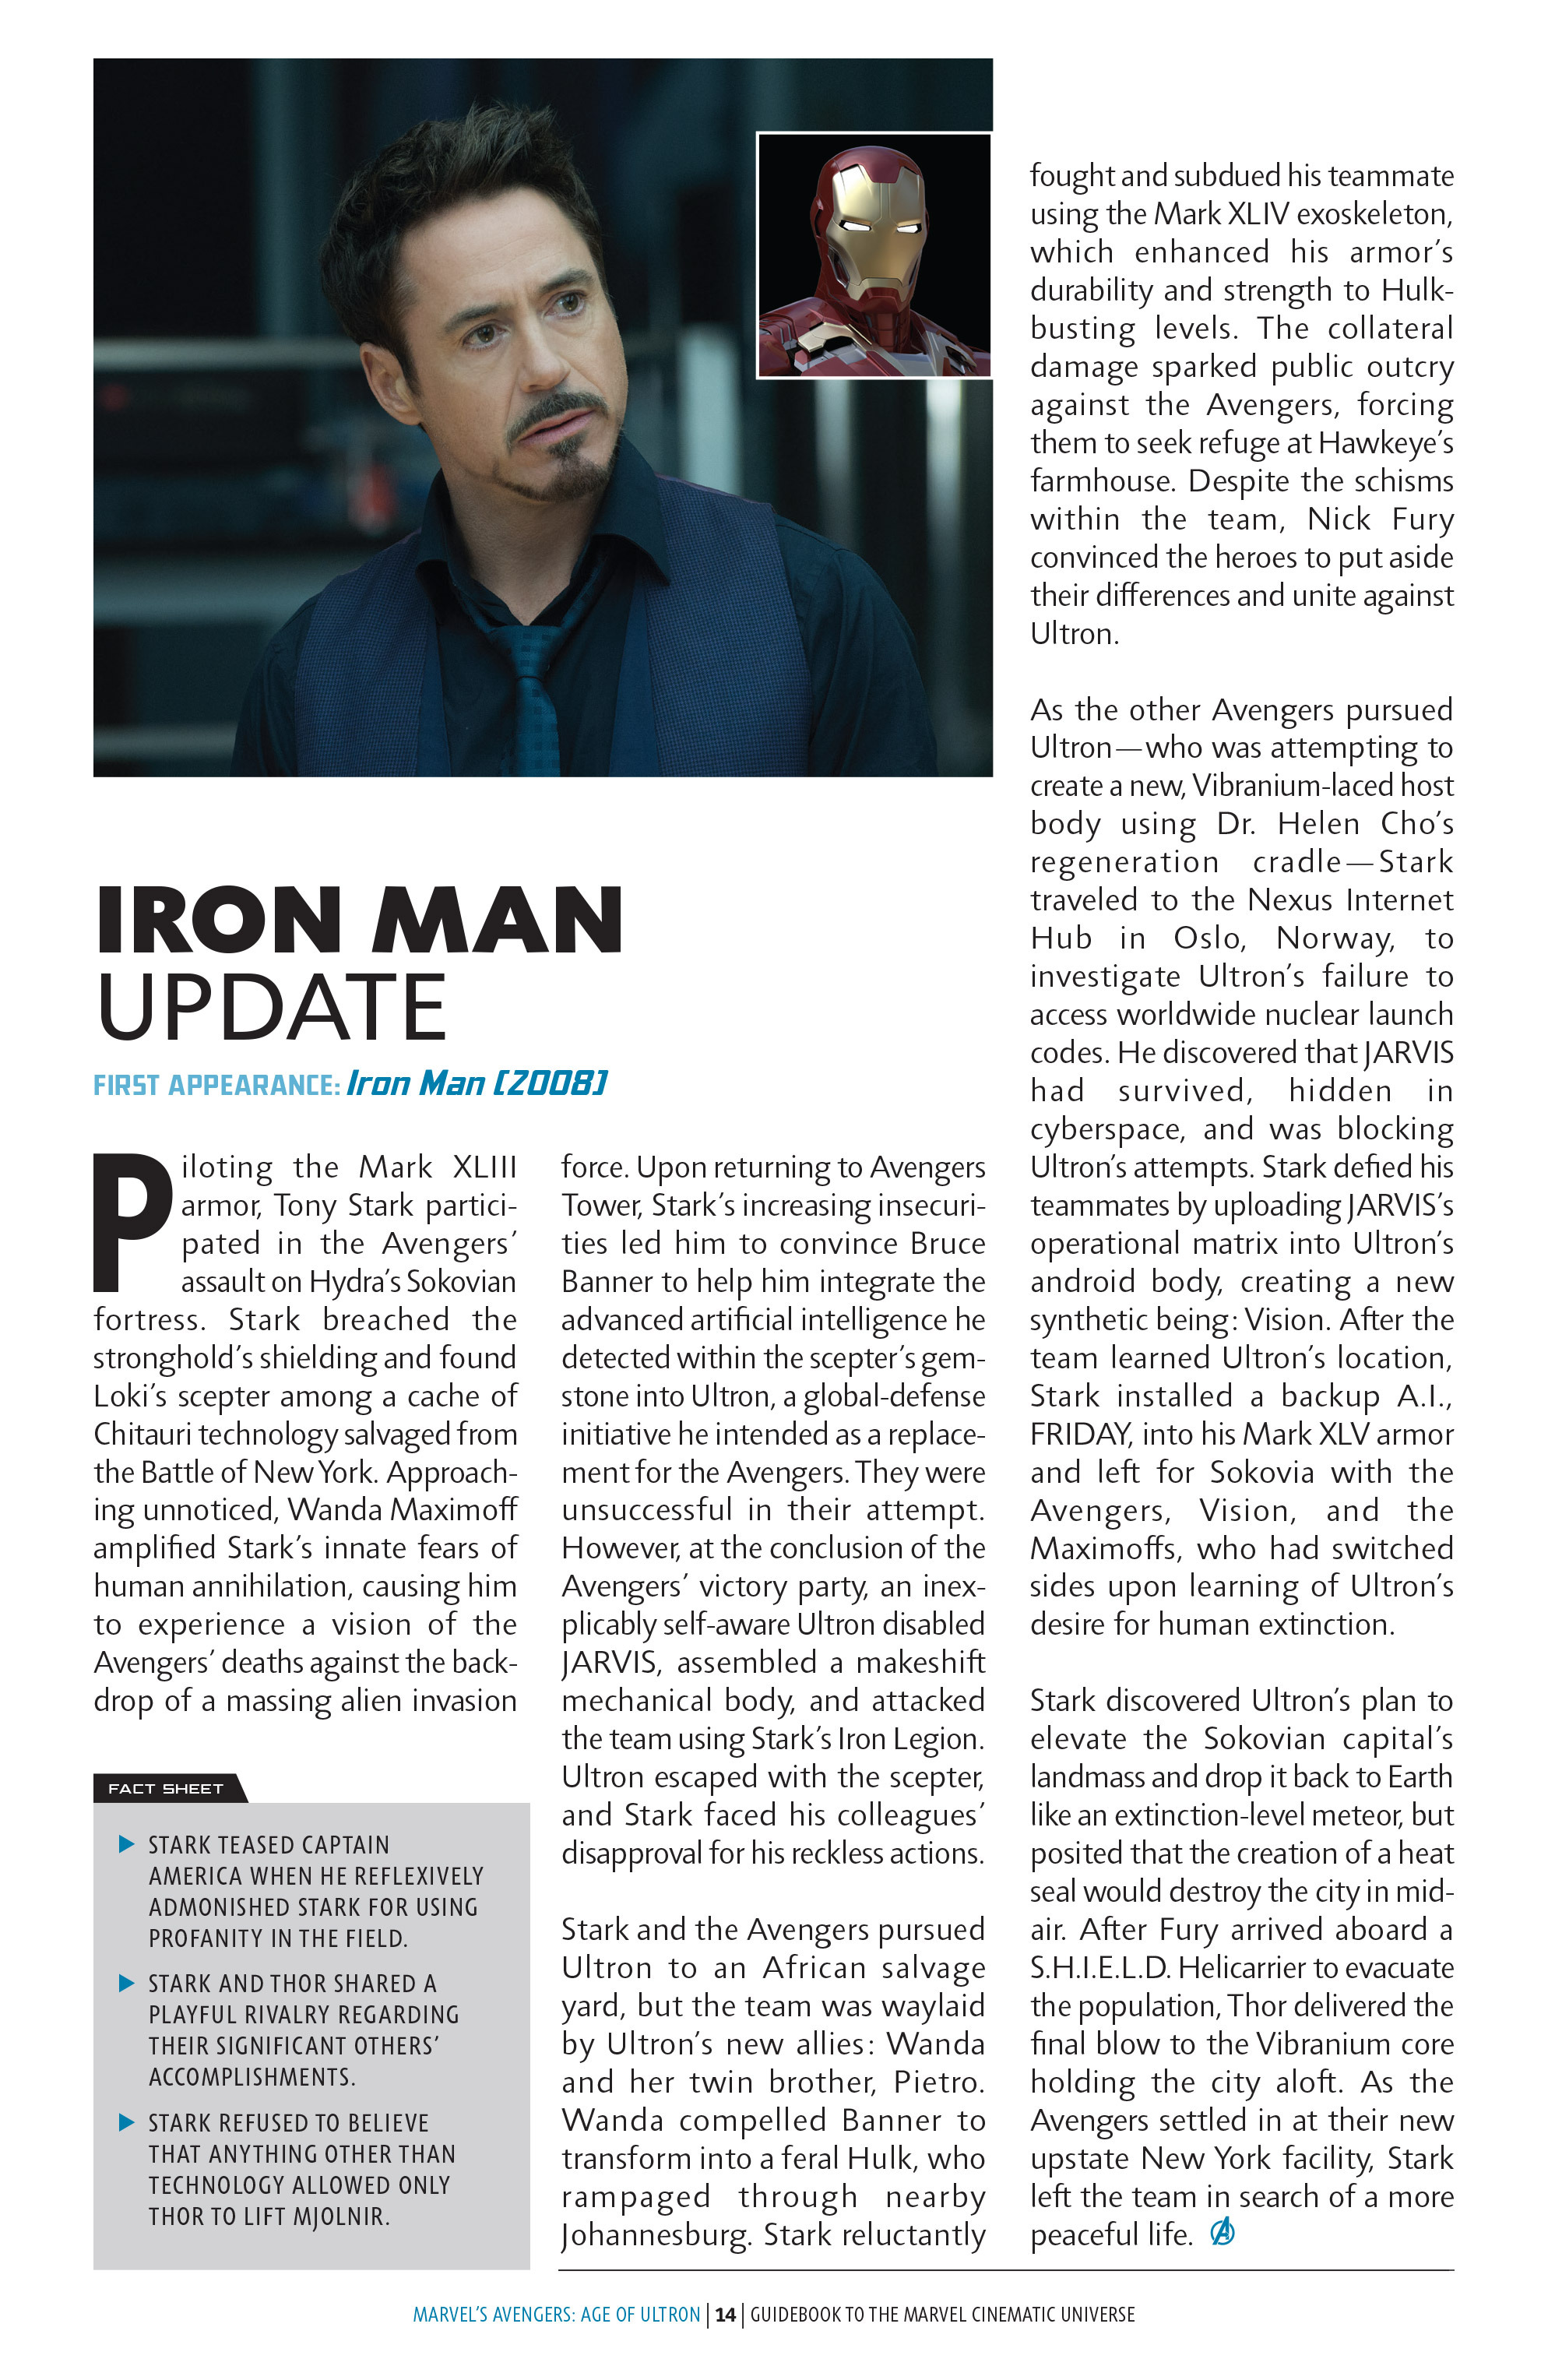 Read online Guidebook To the Marvel Cinematic Universe – Marvel's Avengers: Age of Ultron comic -  Issue # Full - 15